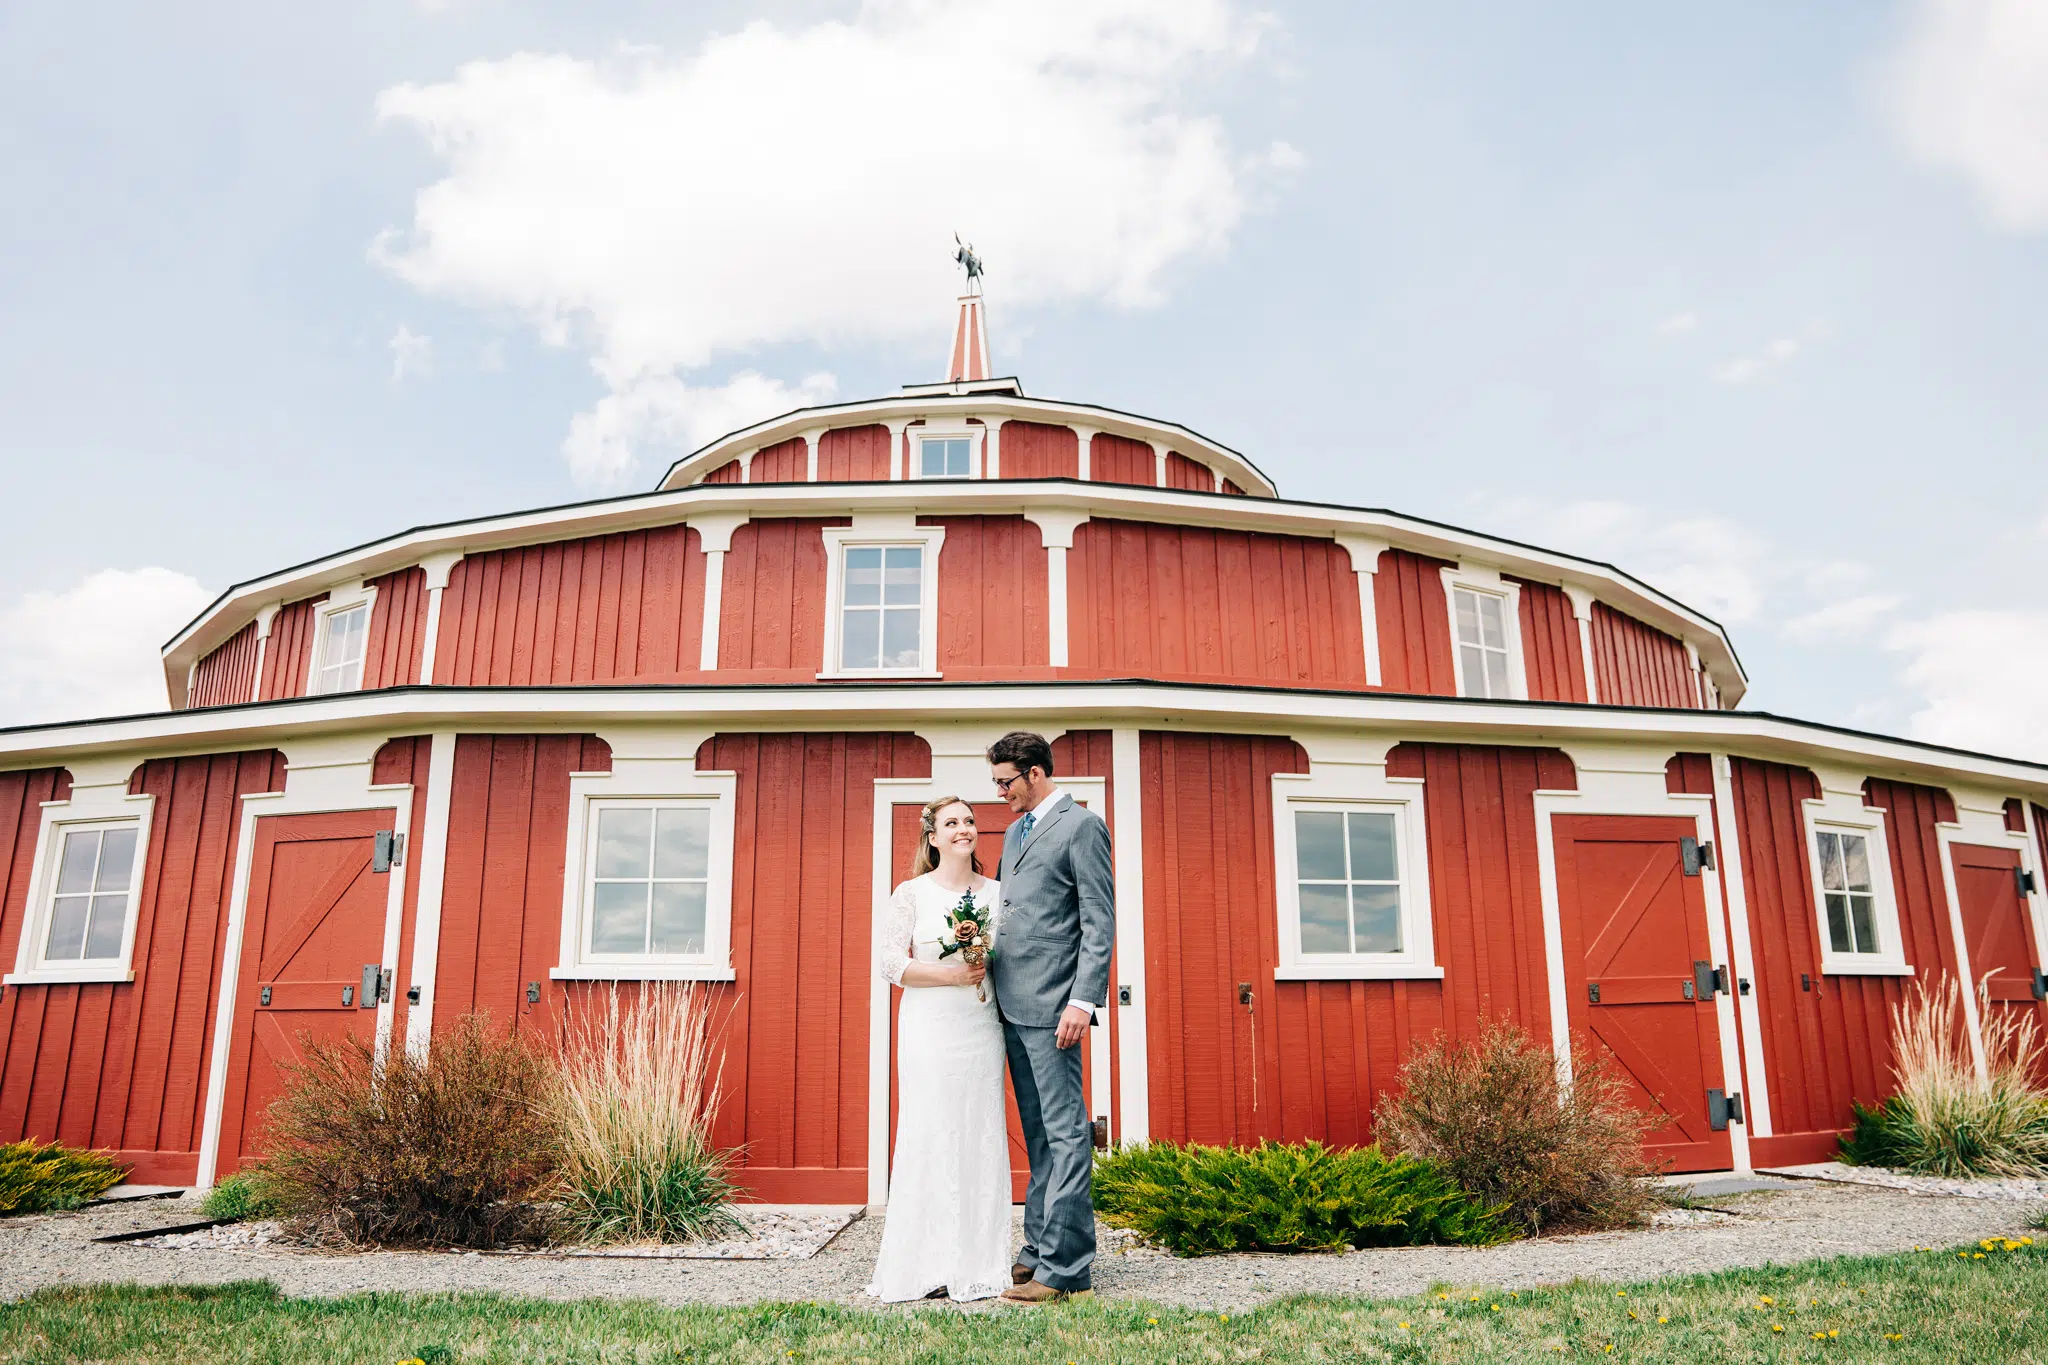 Best Wedding Vendors In Bozeman By Charles Moll Photography